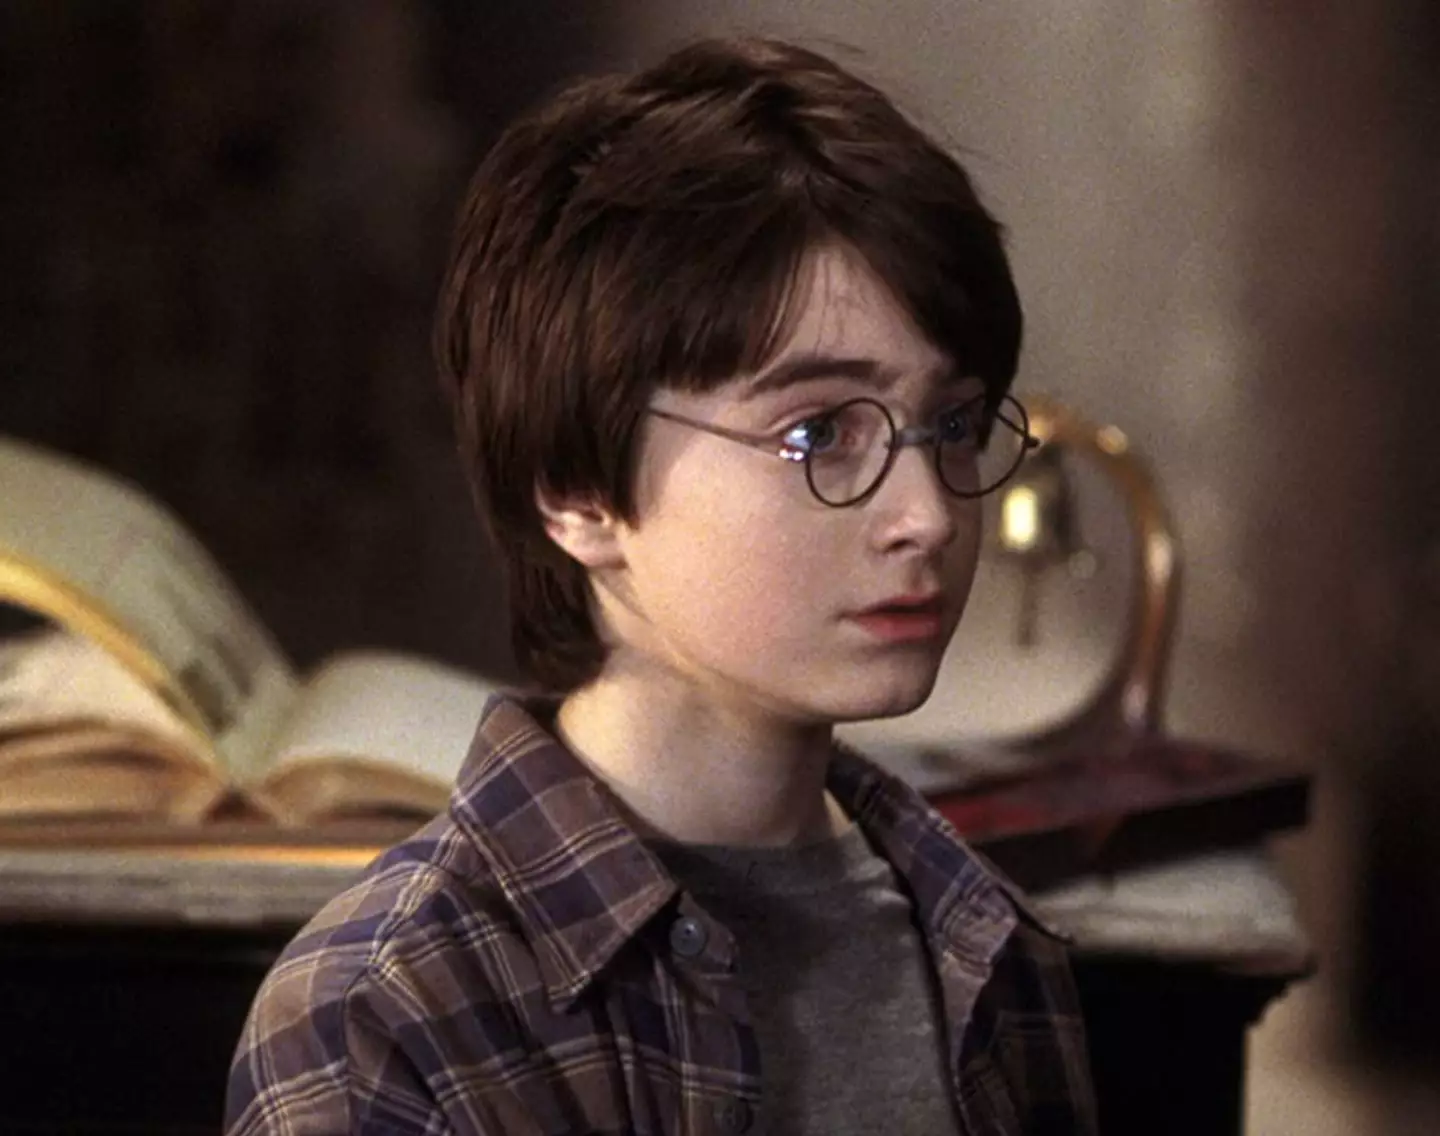 Yes, a whopping 27 actors were replaced in the Harry Potter franchise.